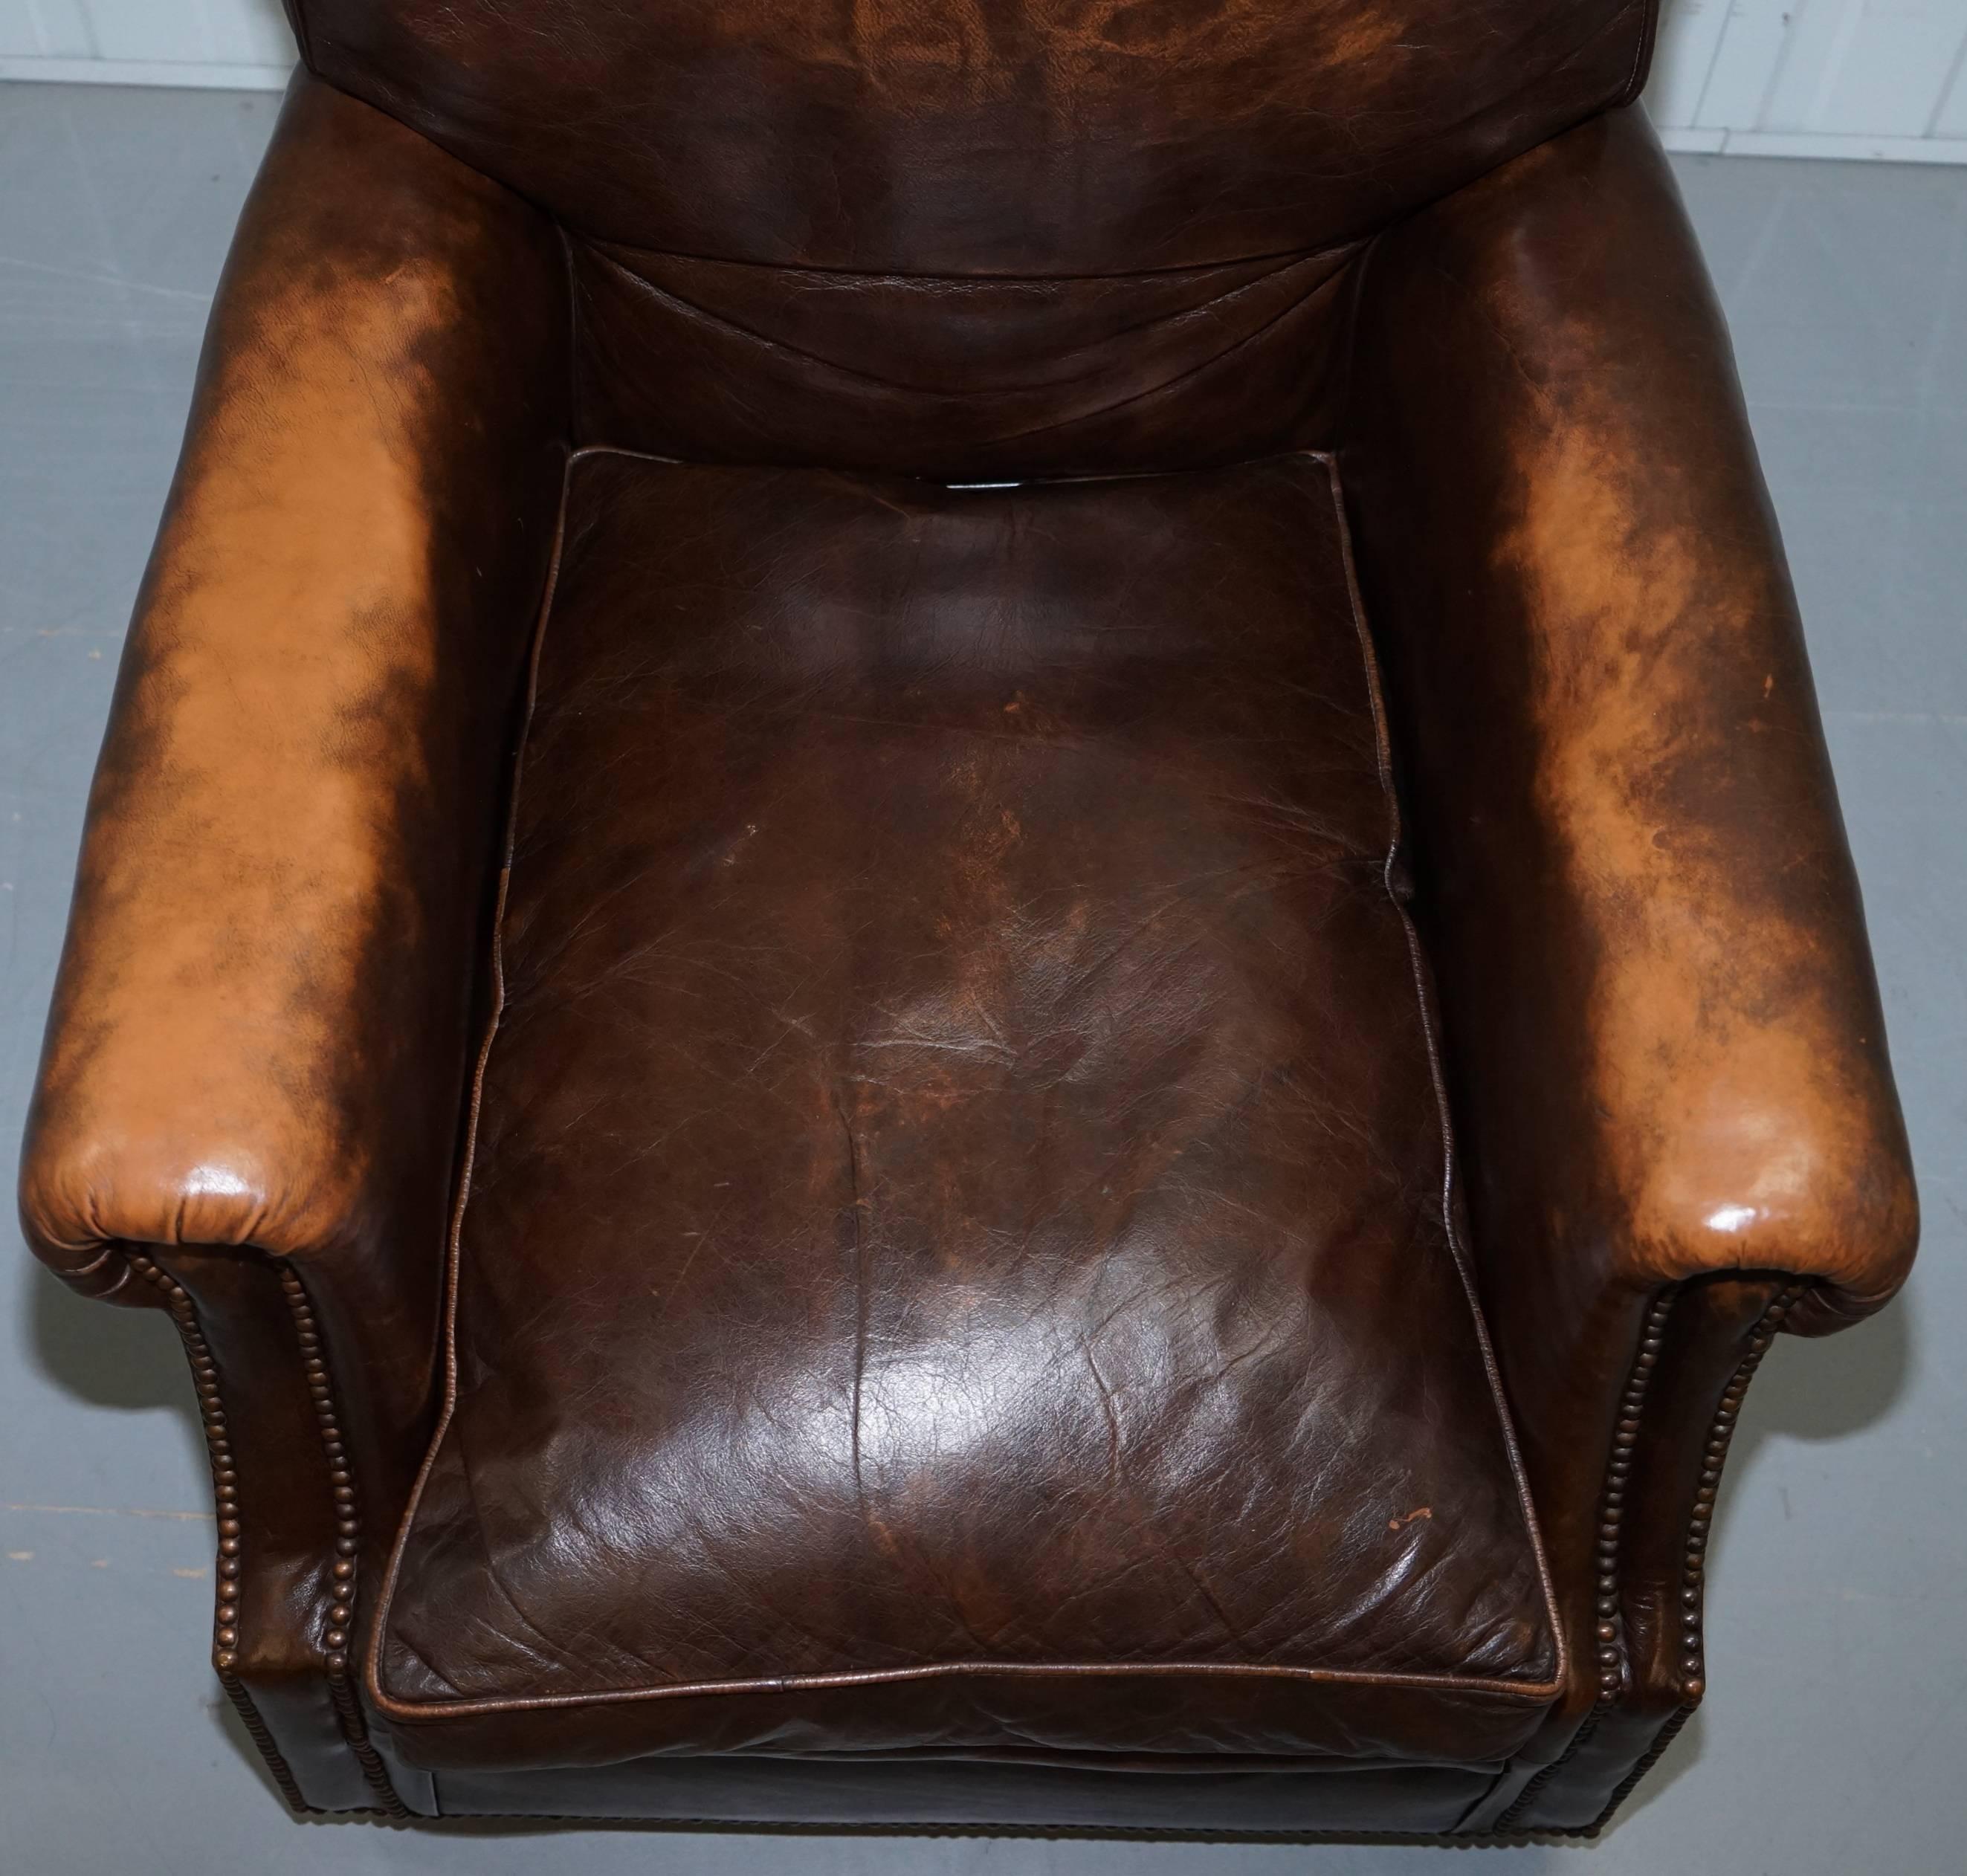 Art Deco Vintage 1920s Coil Sprung Aged Brown Leather Club Armchair on Castors Rare Find